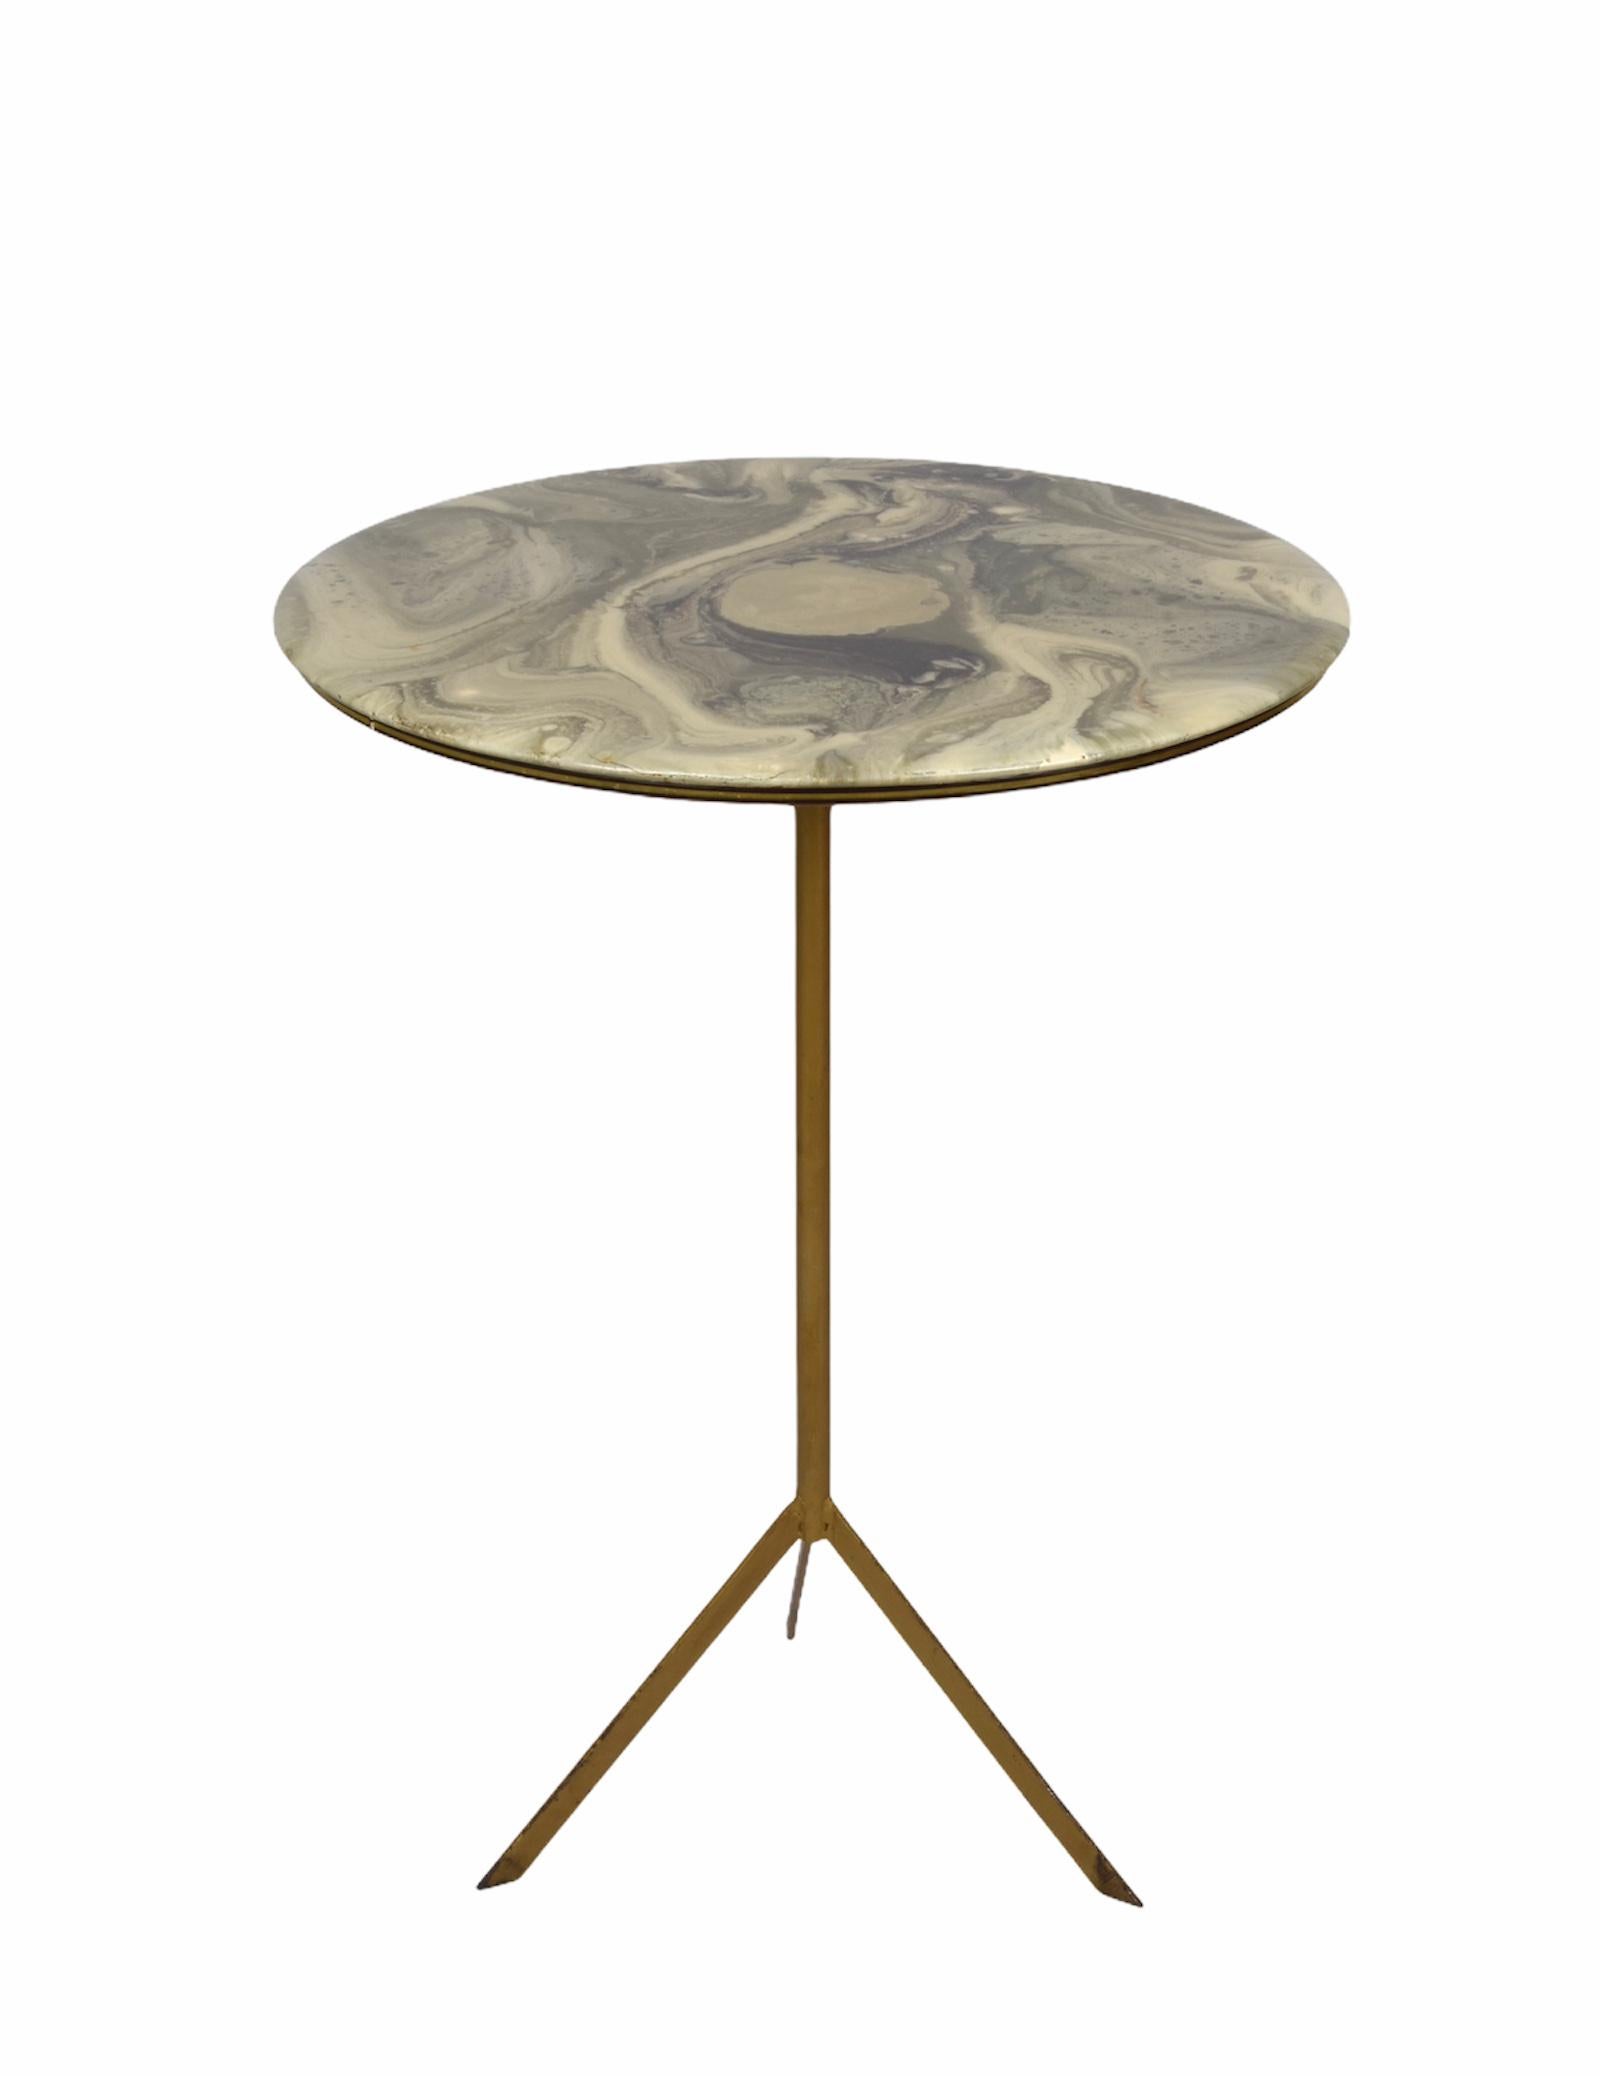 Midcentury Round Italian Gueridon Table with Marble Resin Top and Metal, 1950s For Sale 1